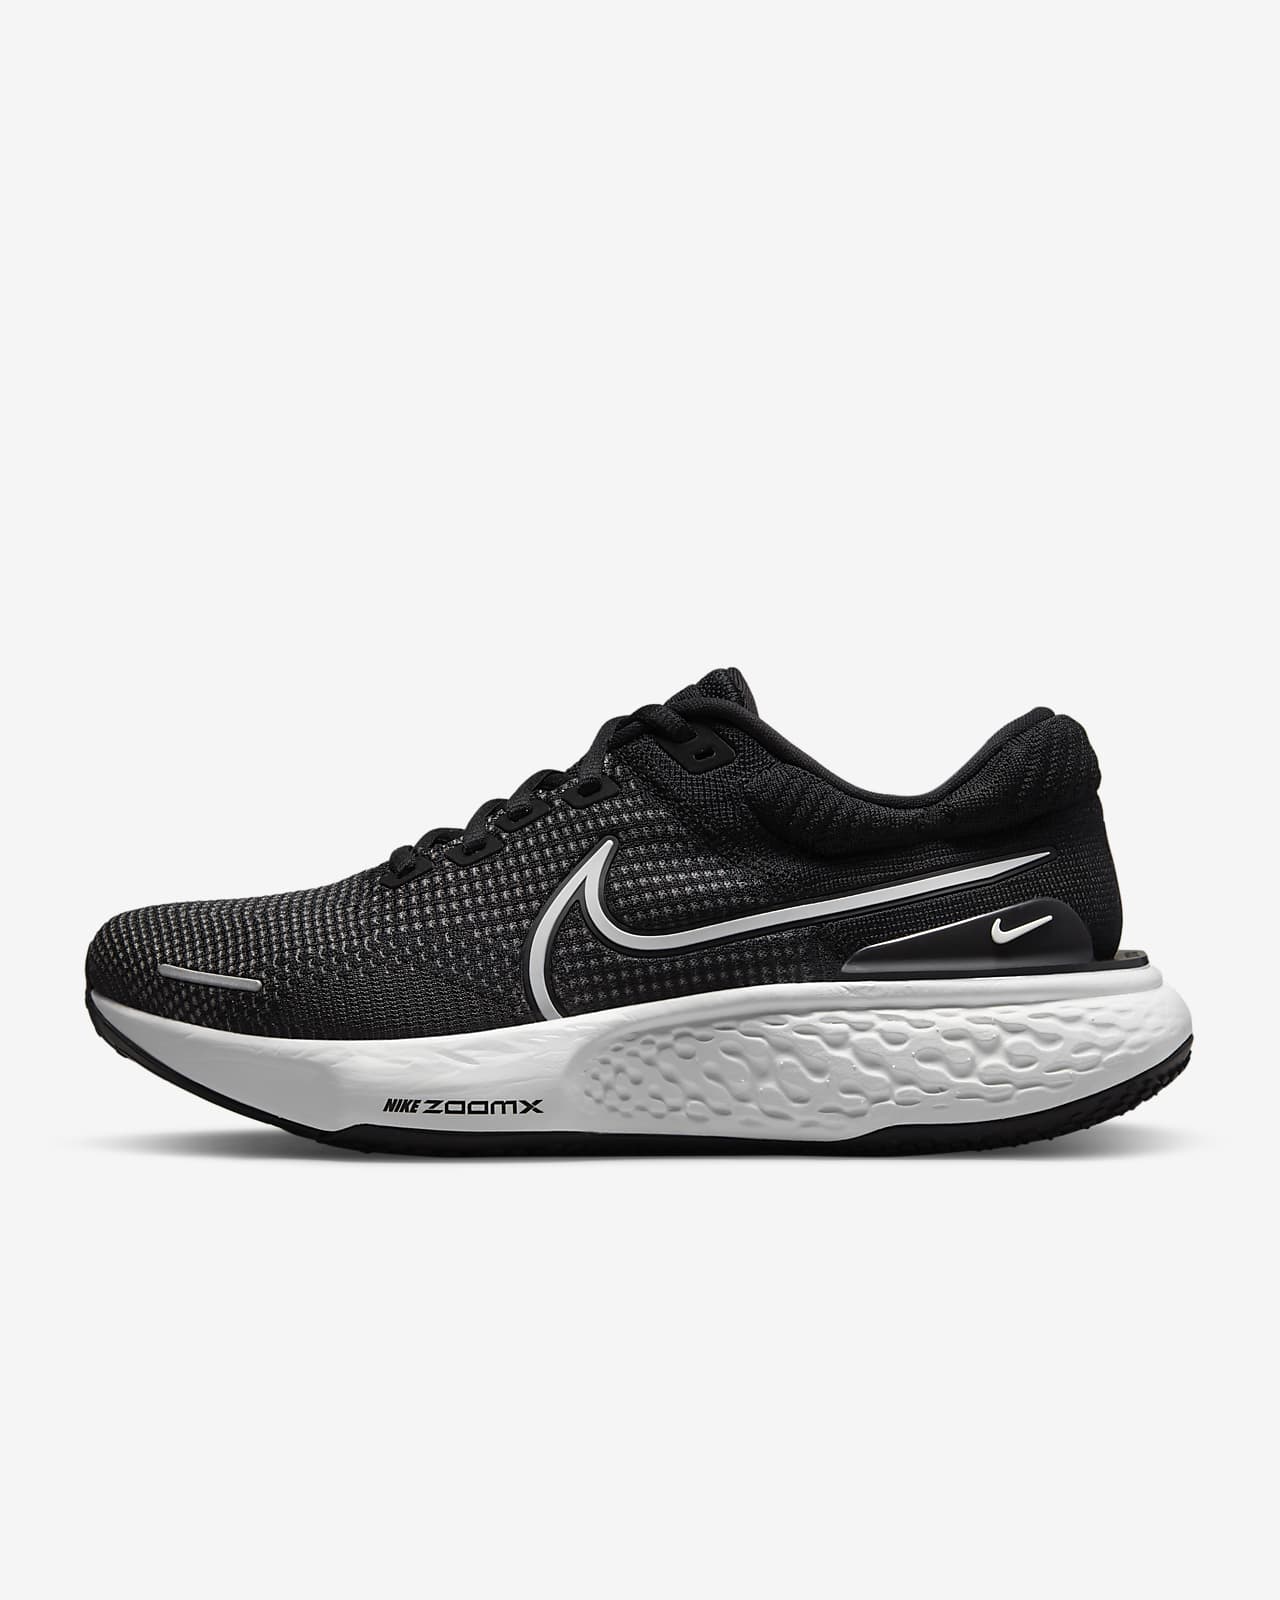 nike ZoomX Invincible Run Flyknit 2 Review: The Running Shoe Thats Changing the Game!